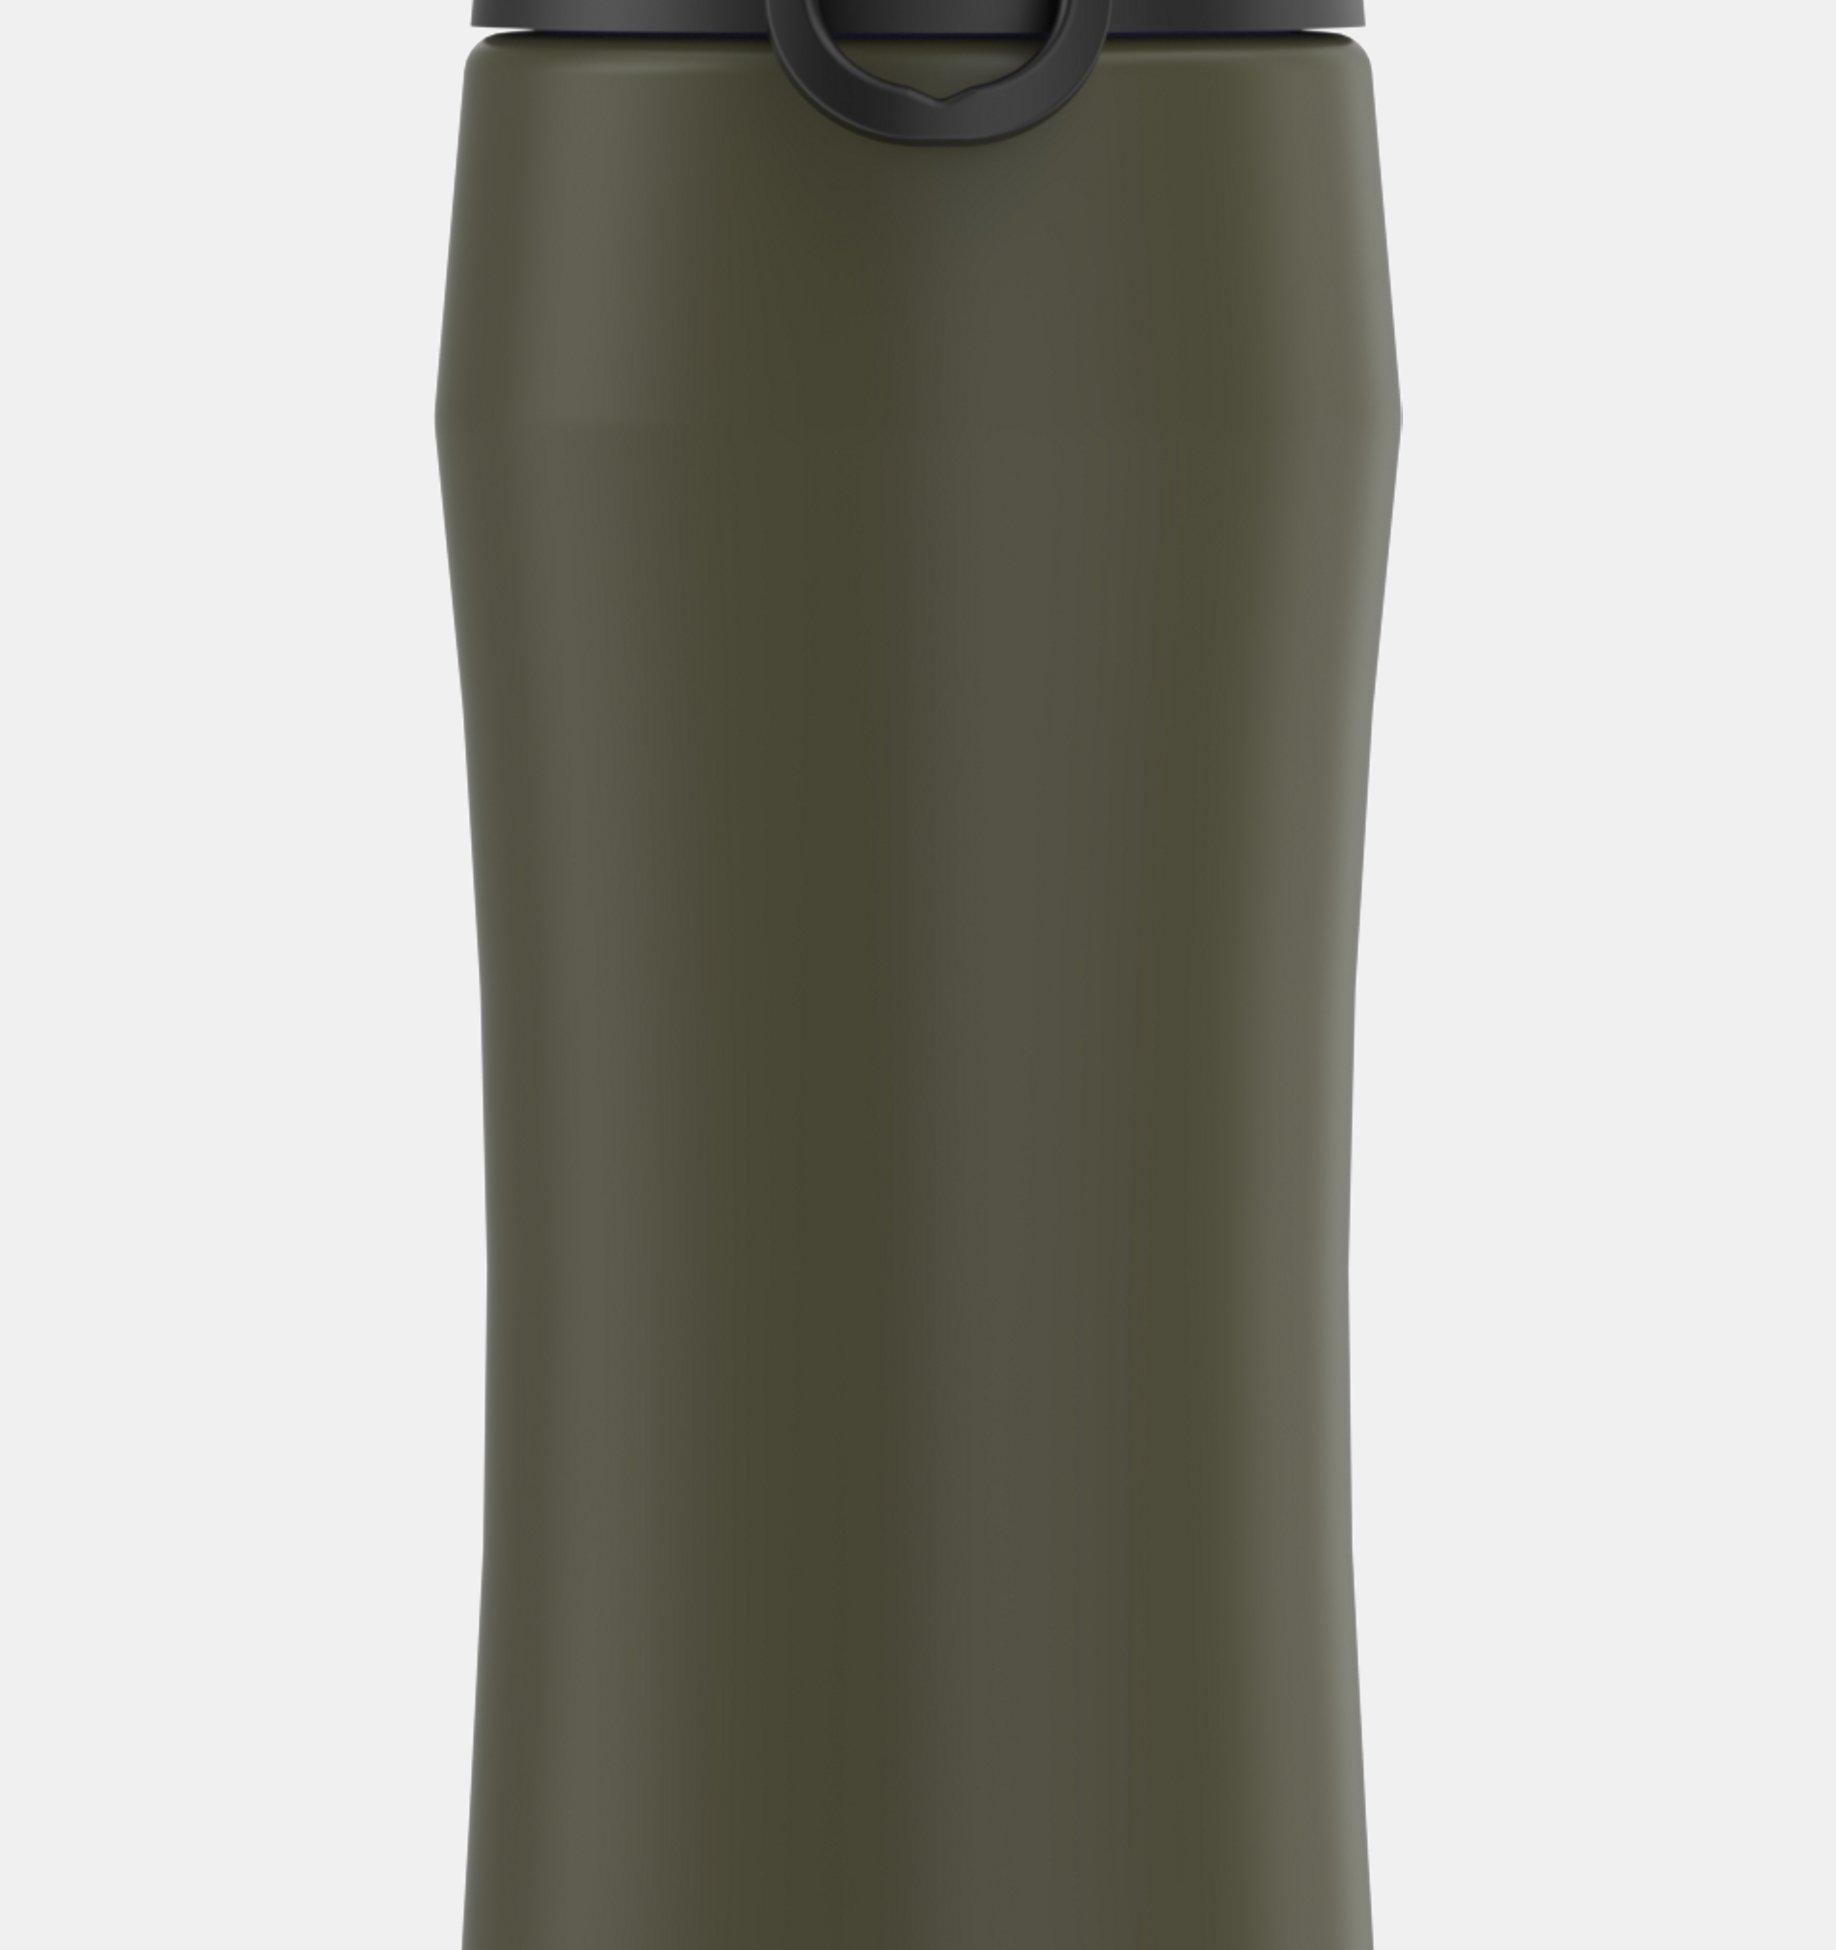 Under Armour 18oz Beyond Stainless Steel Water Bottle - Temple's